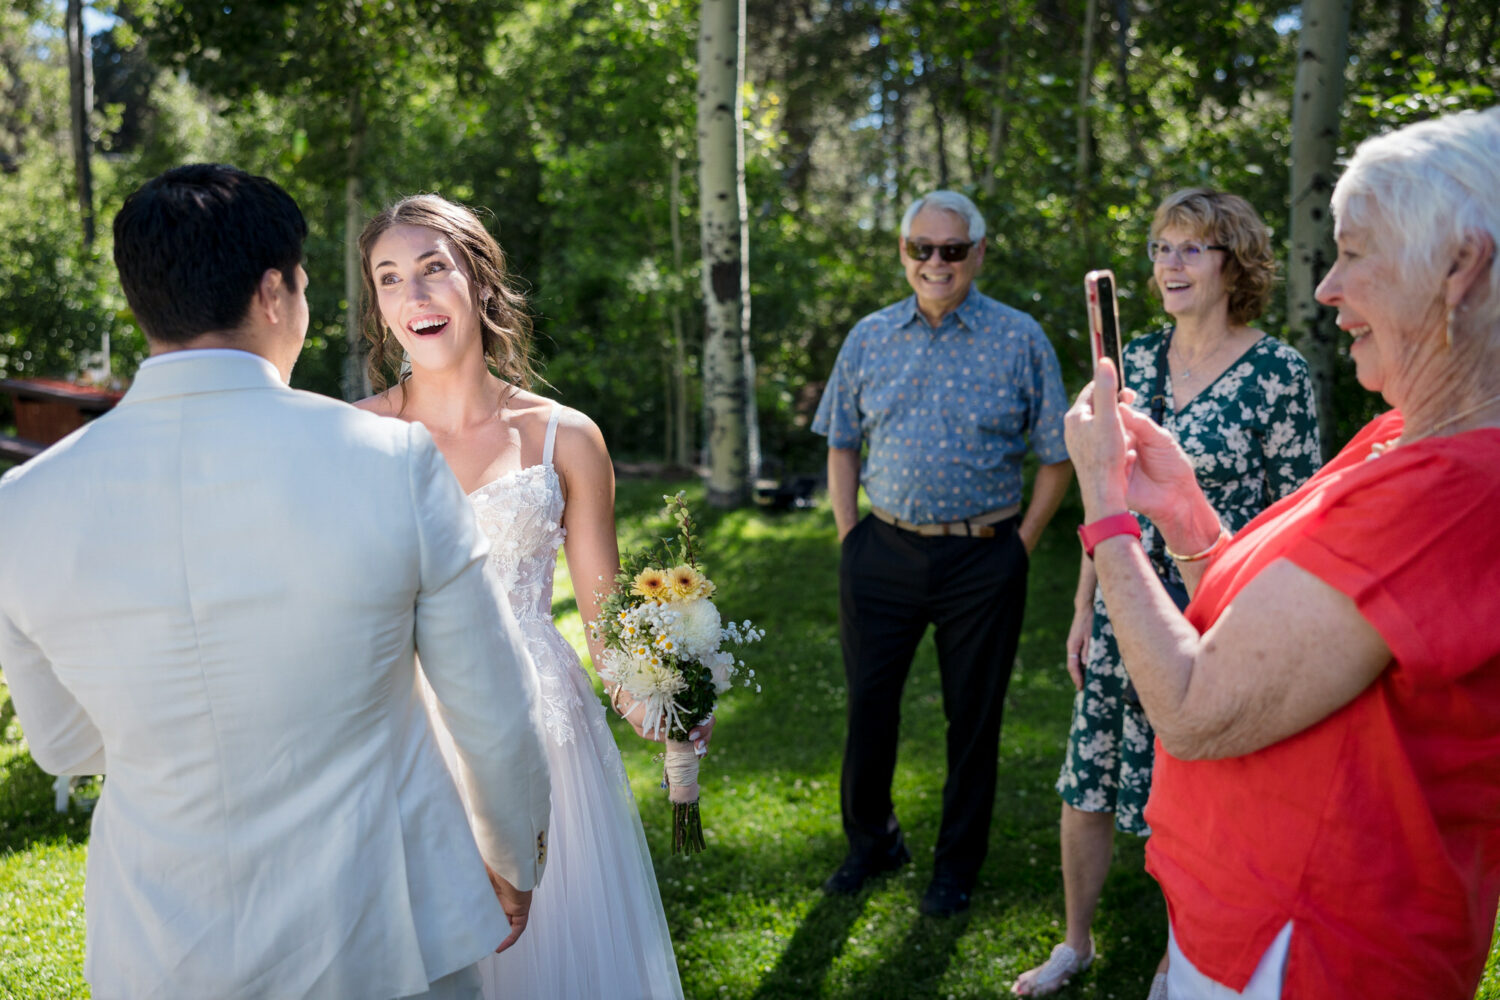 Joy and excitement on a bride's face at an outdoor Lake Tahoe wedding among aspen trees.